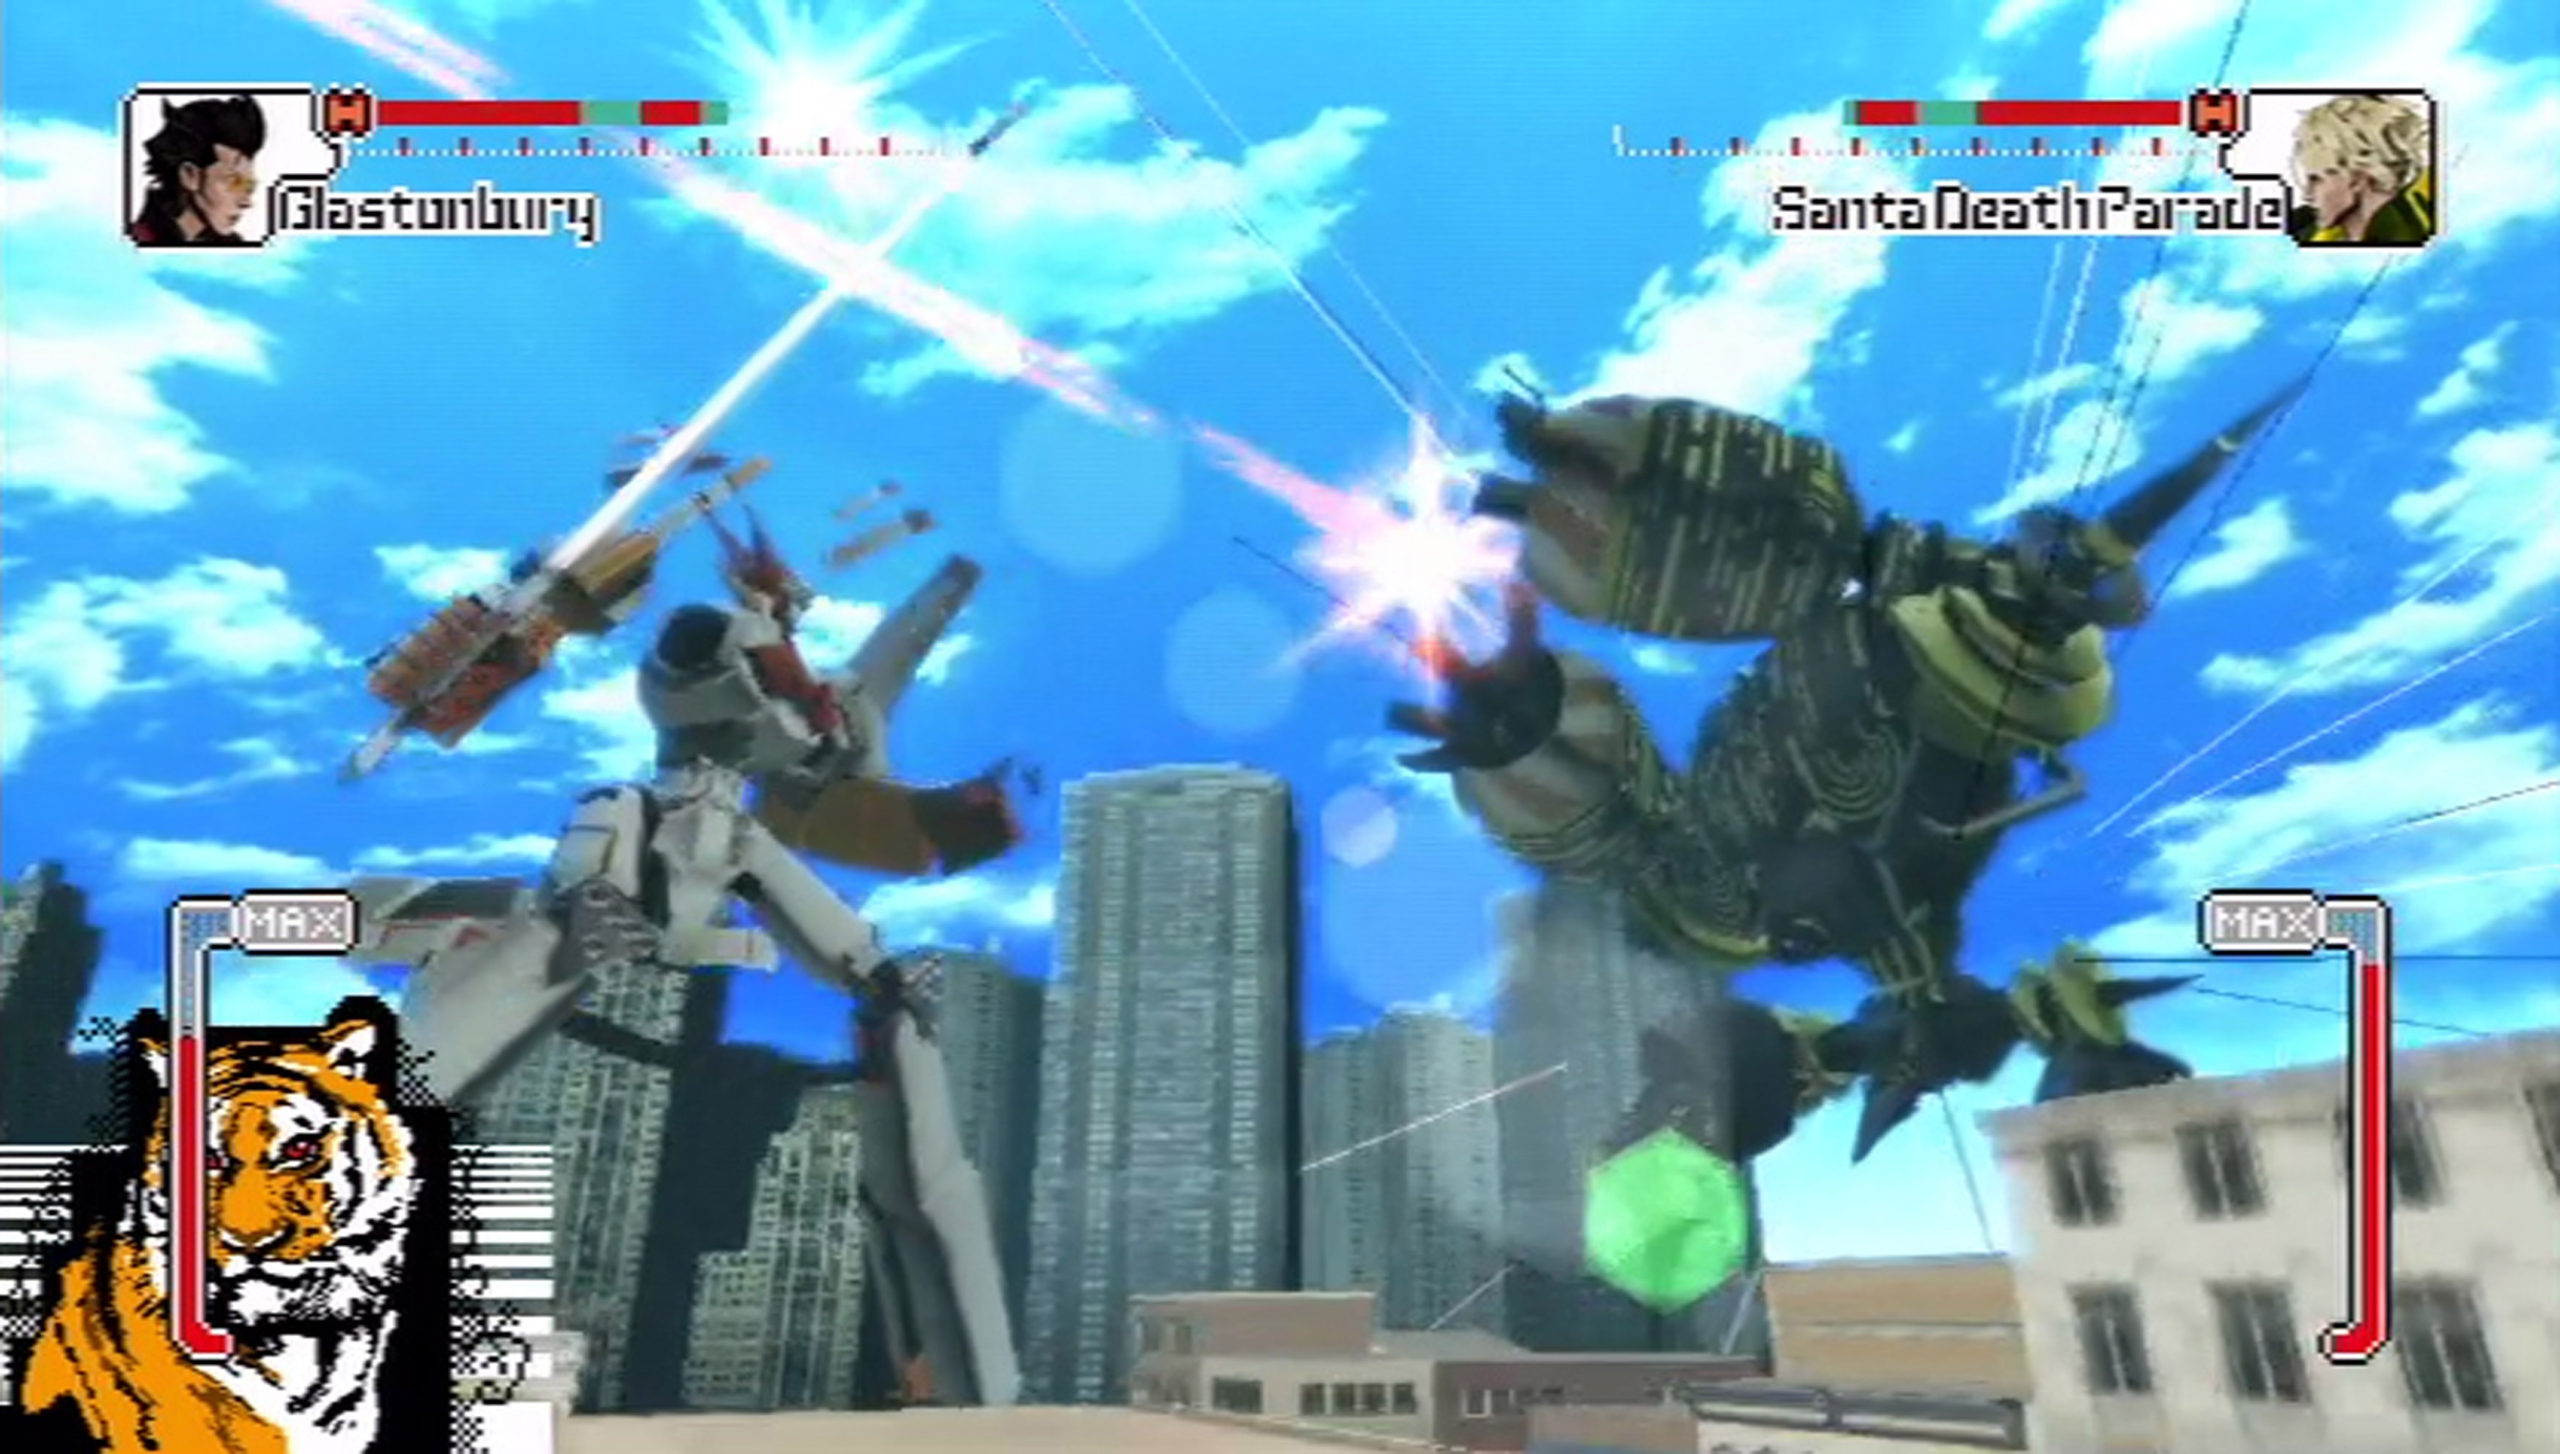 A giant mech piloted by Travis battling an enemy mech in front of a city scape. There's an energy meter with a tiger on the left side of the screen.